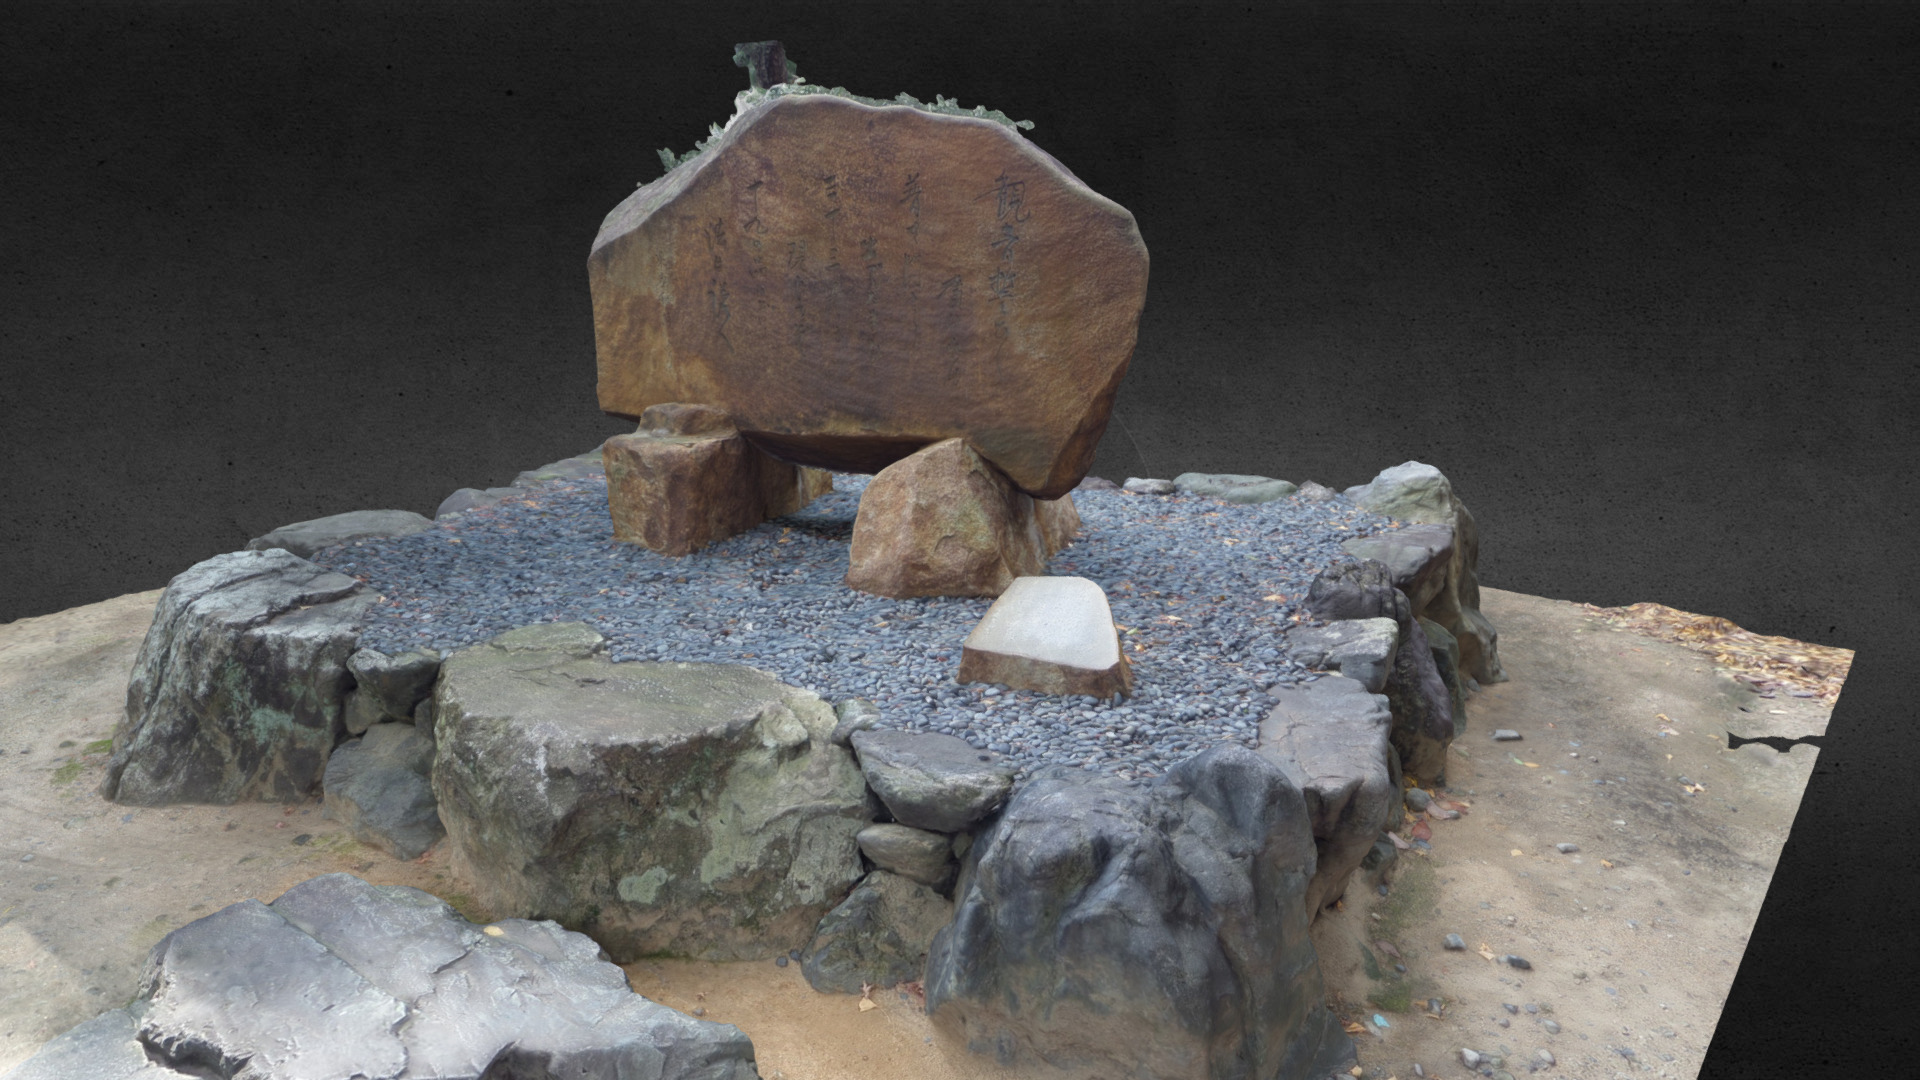 3D model Kyoto Rock - This is a 3D model of the Kyoto Rock. The 3D model is about a group of rocks.